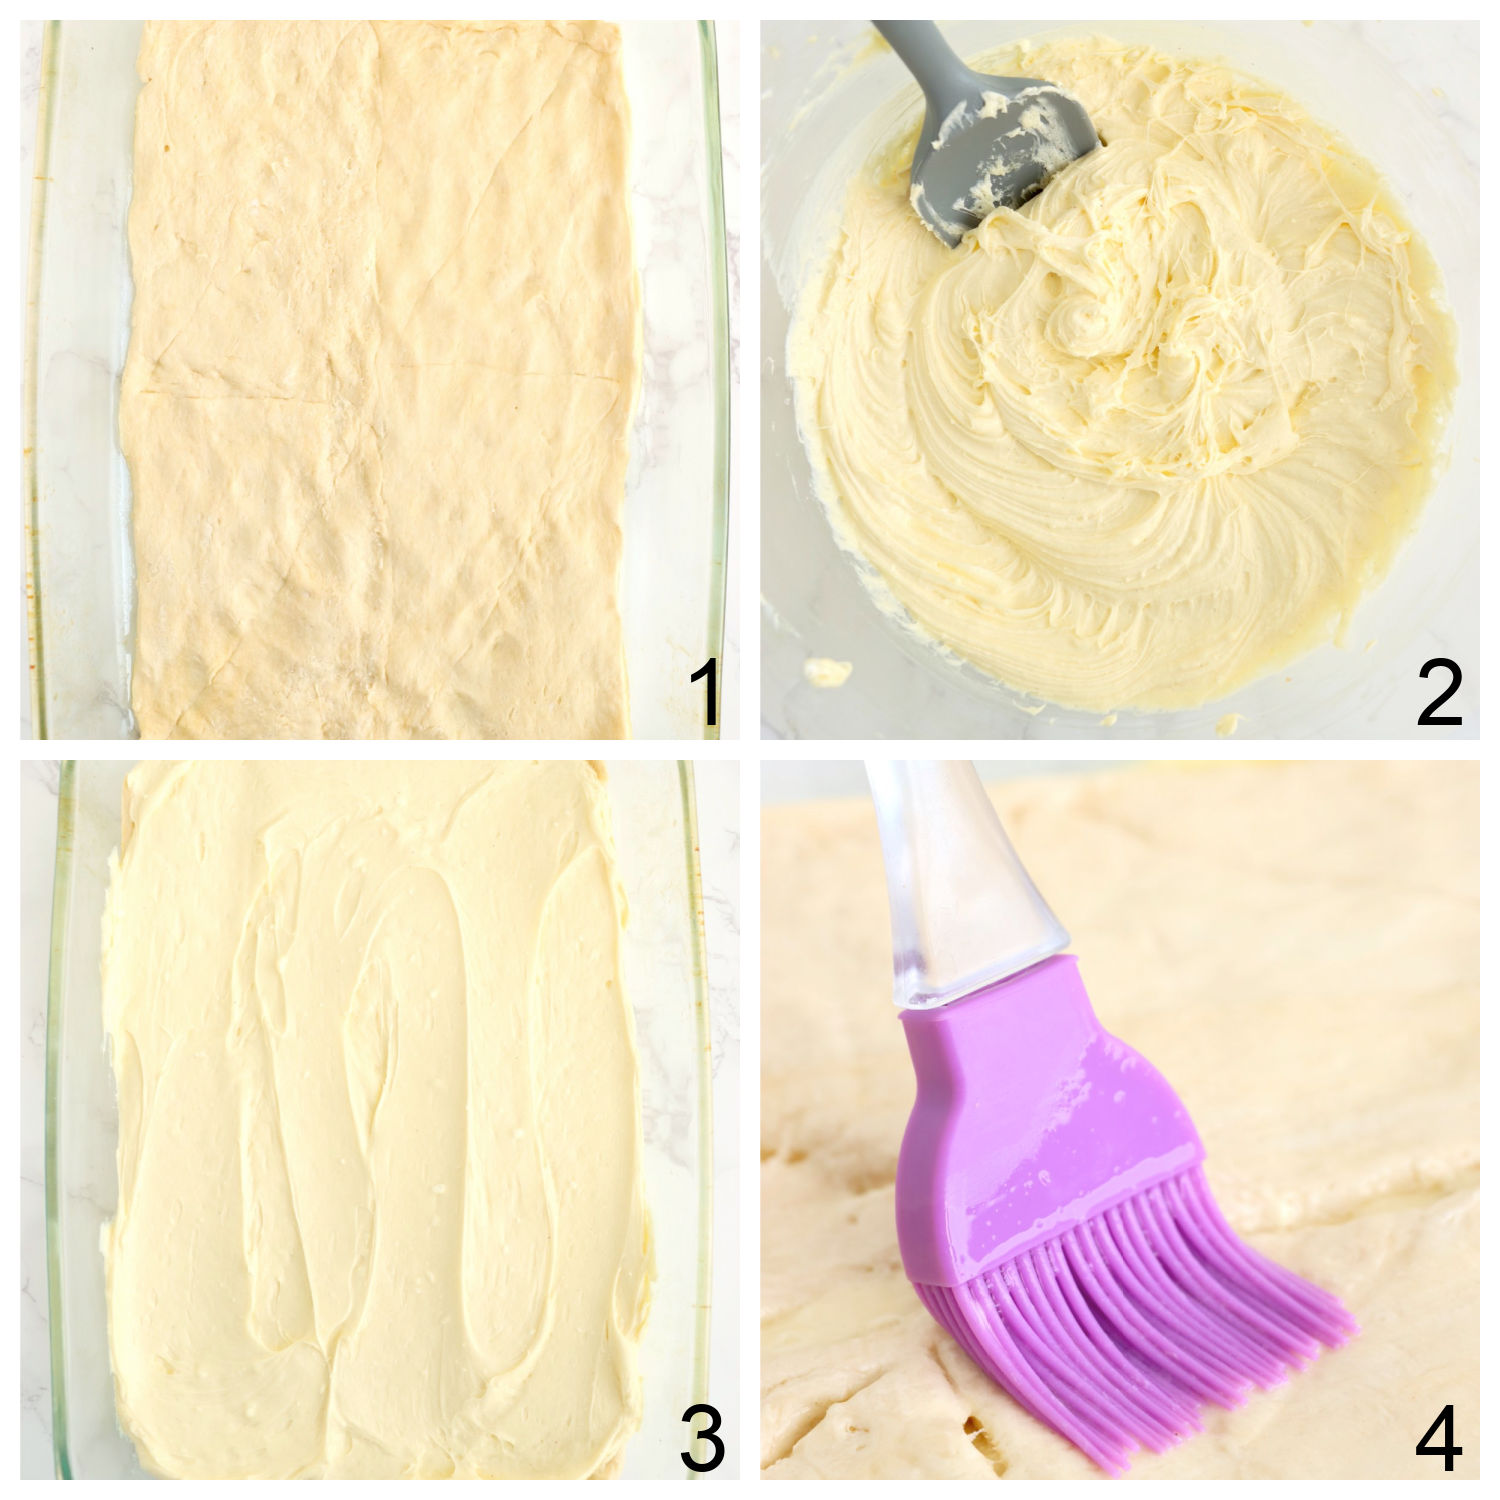 steps for preparing crescent rolls to make a cheese danish